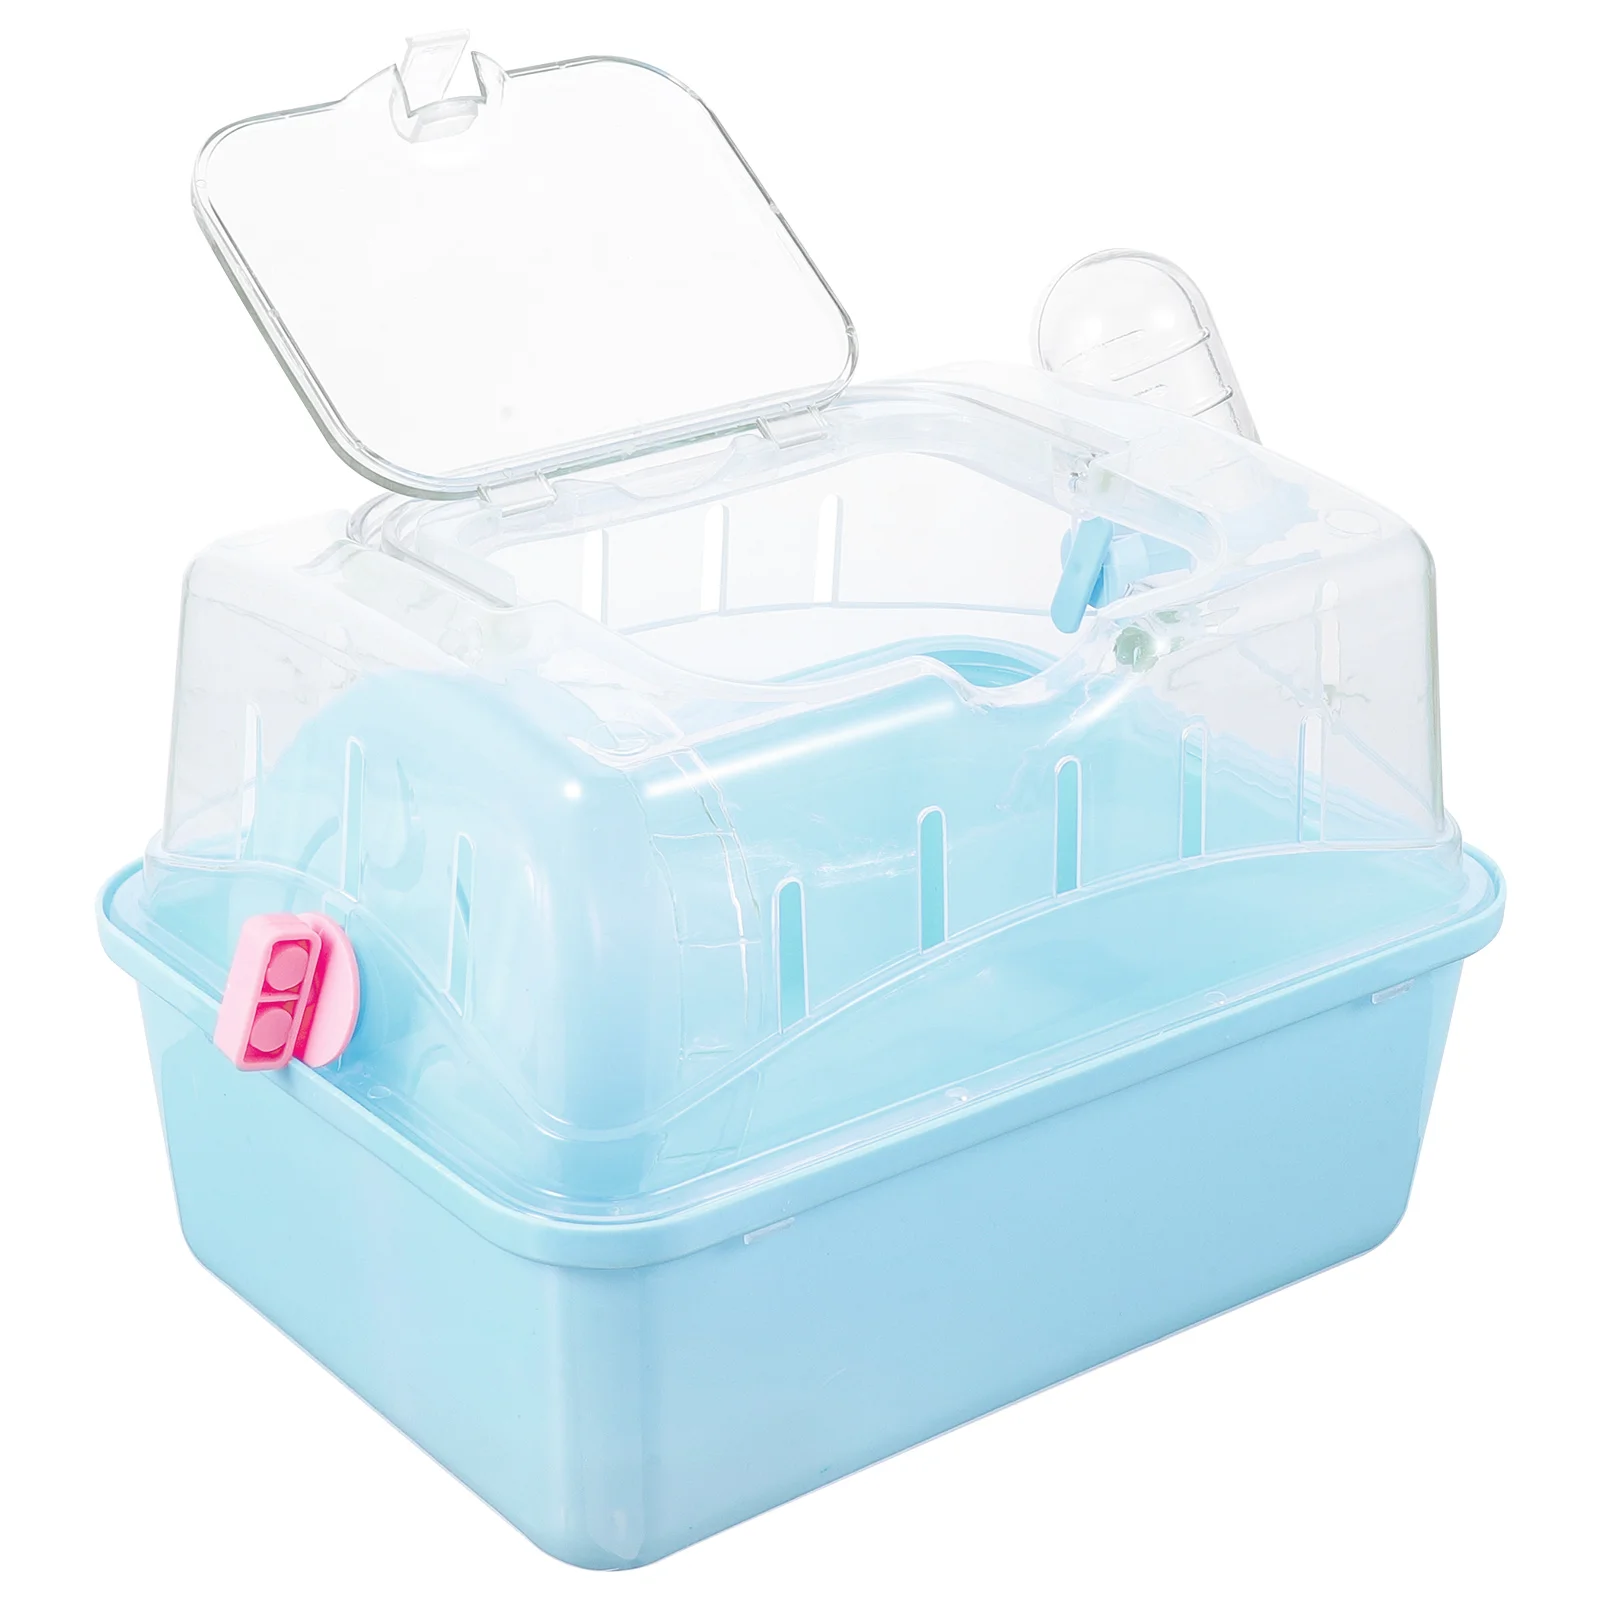 

Hamster Cage Clear Container Small Guinea Pigs Cages Carrying Case Hamsters Plastic Travel Pet Carrier